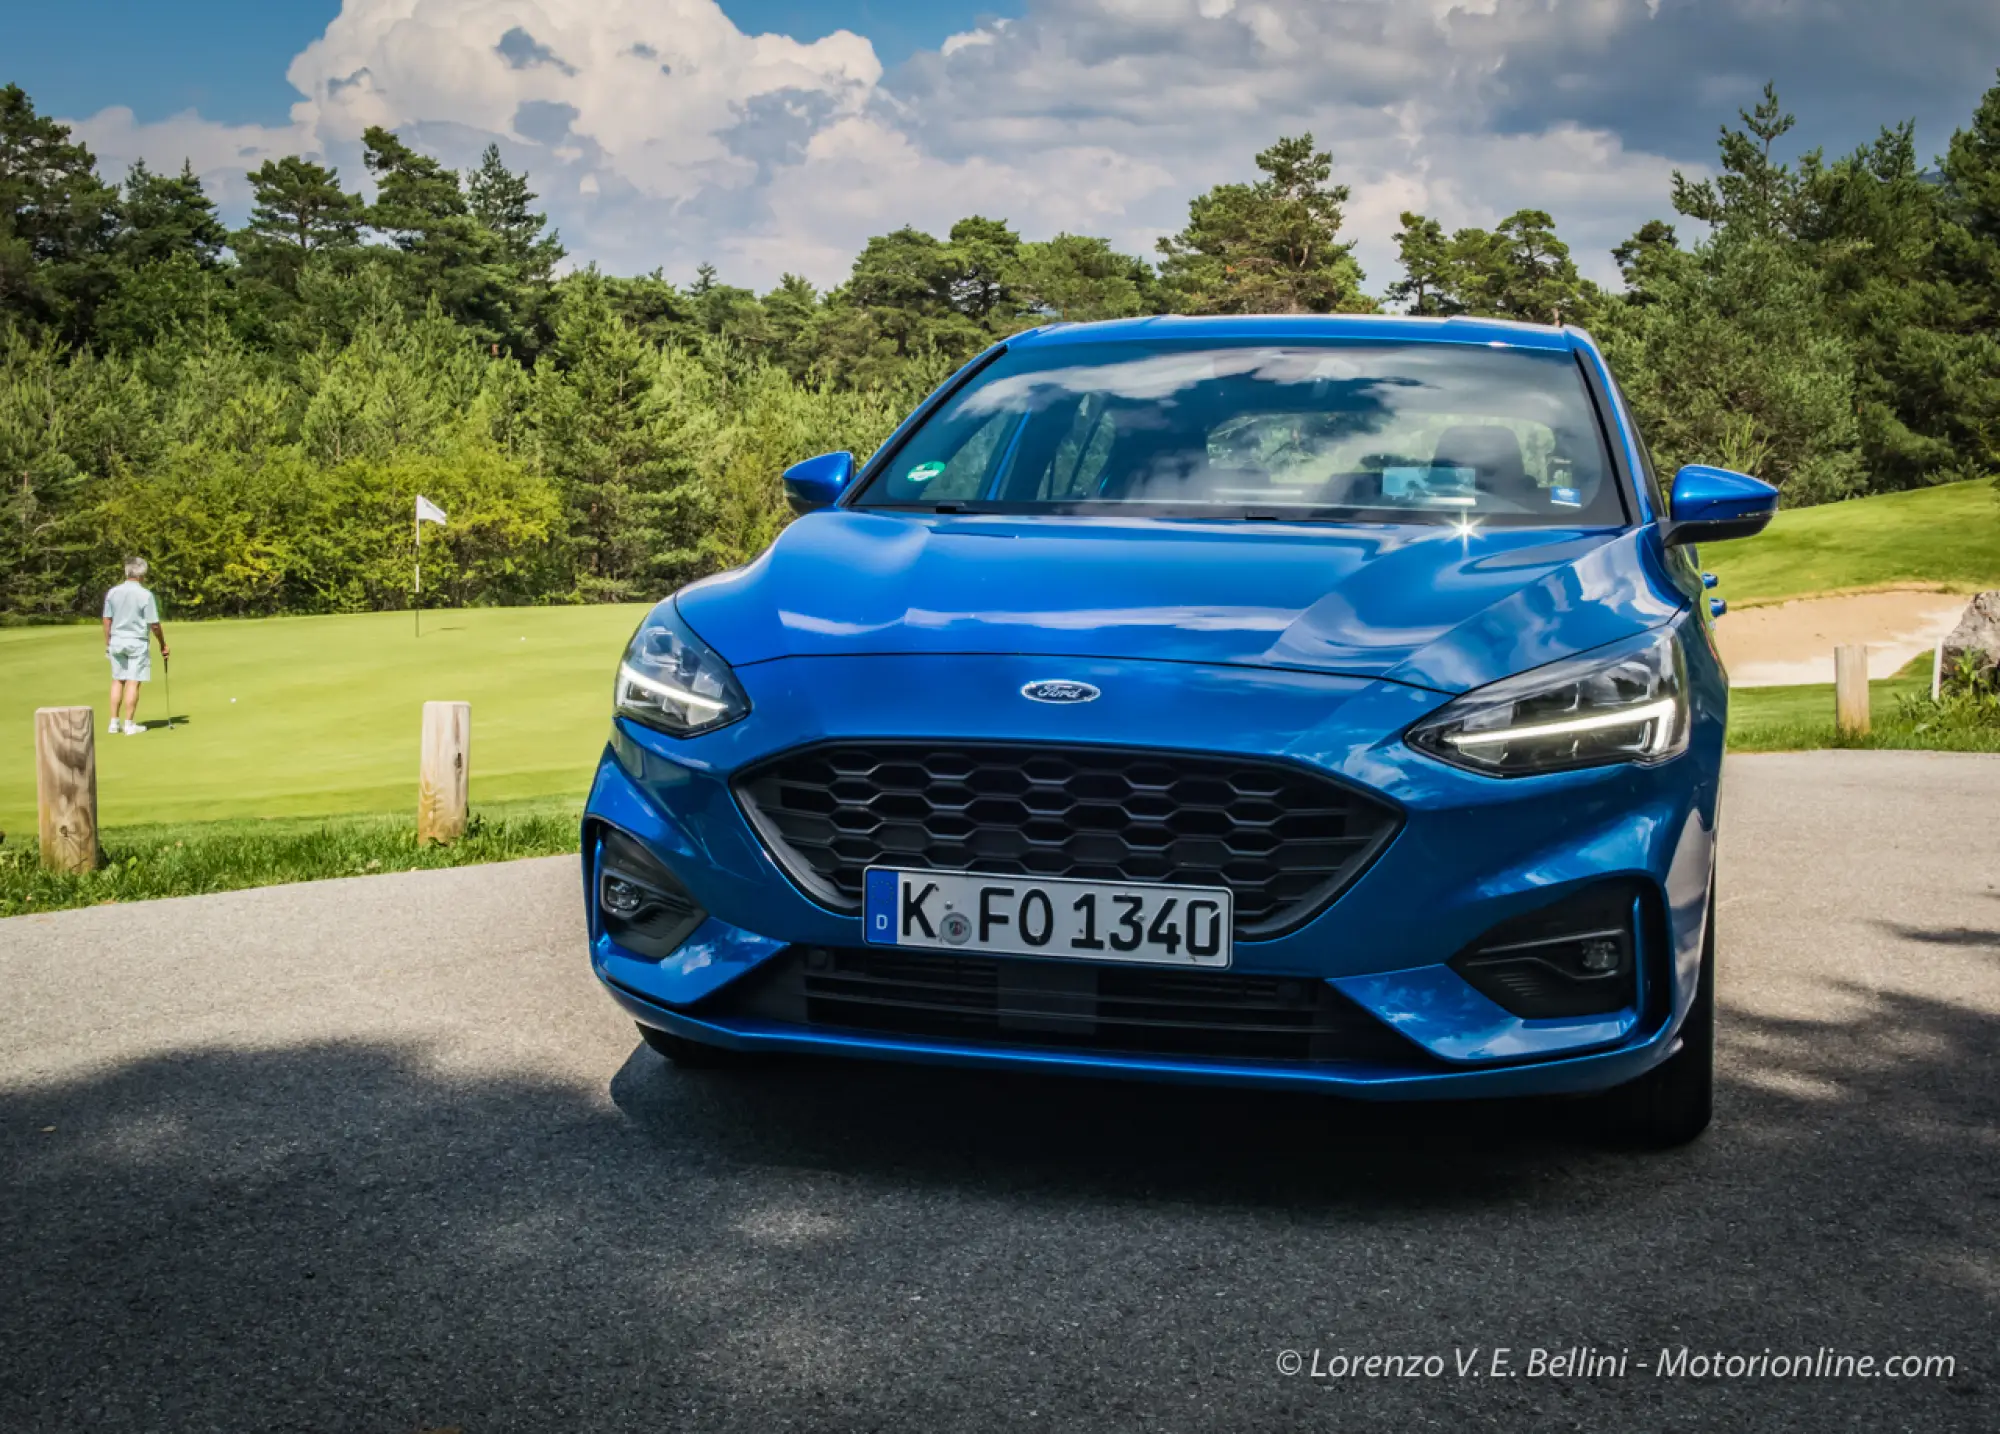 Nuova Ford Focus MY 2018 - Test Drive in Anteprima - 3